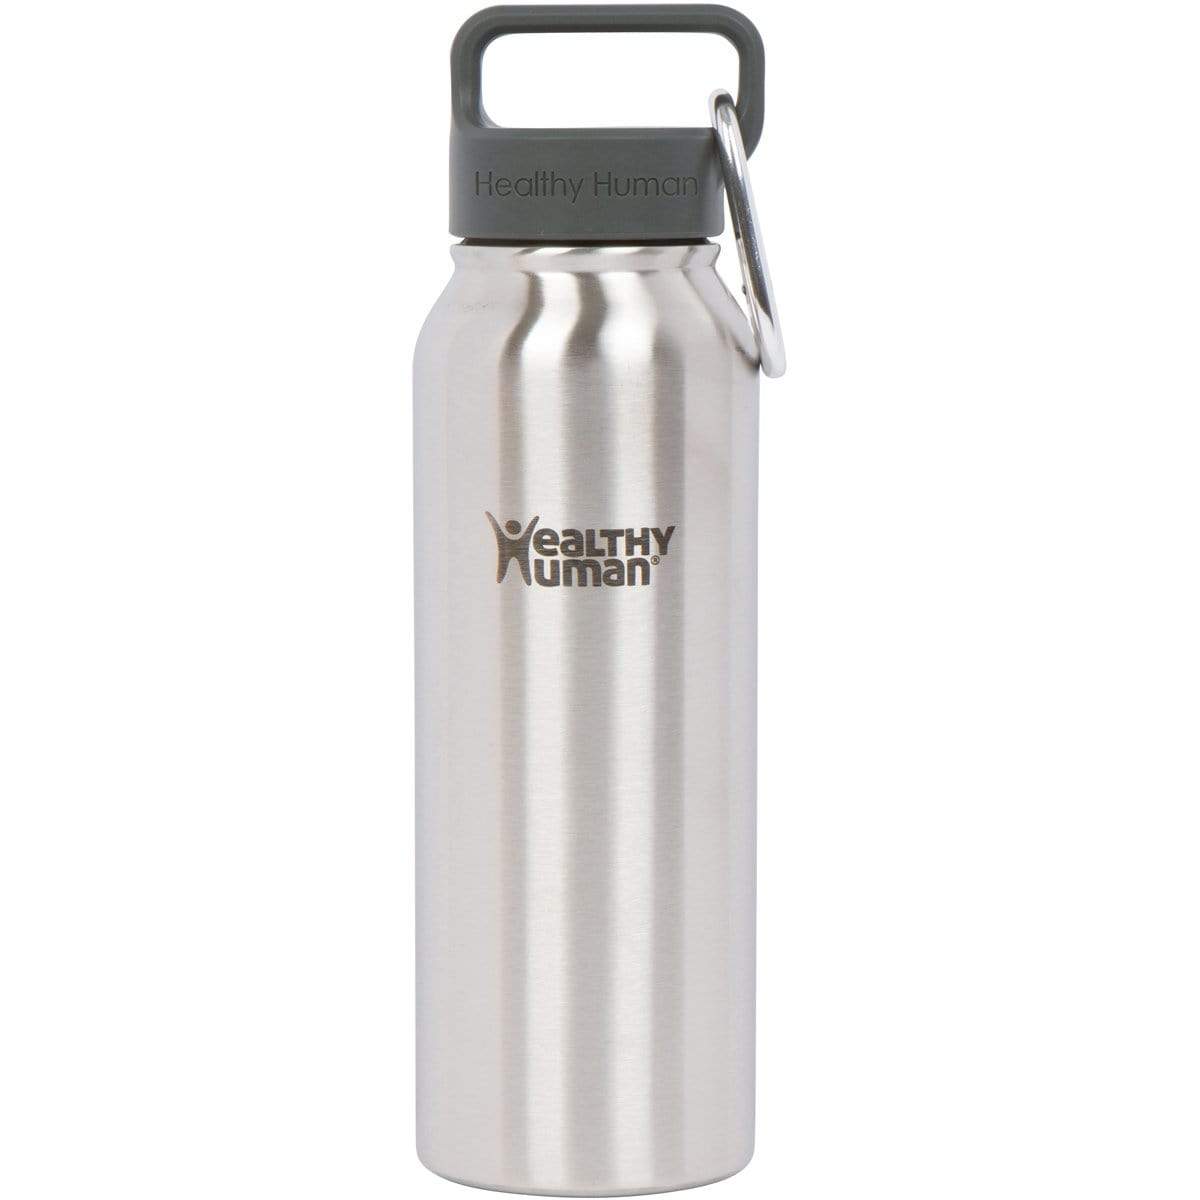 Healthy Human 21oz-stone-white Insulated Stainless Steel Water Bottle Stein